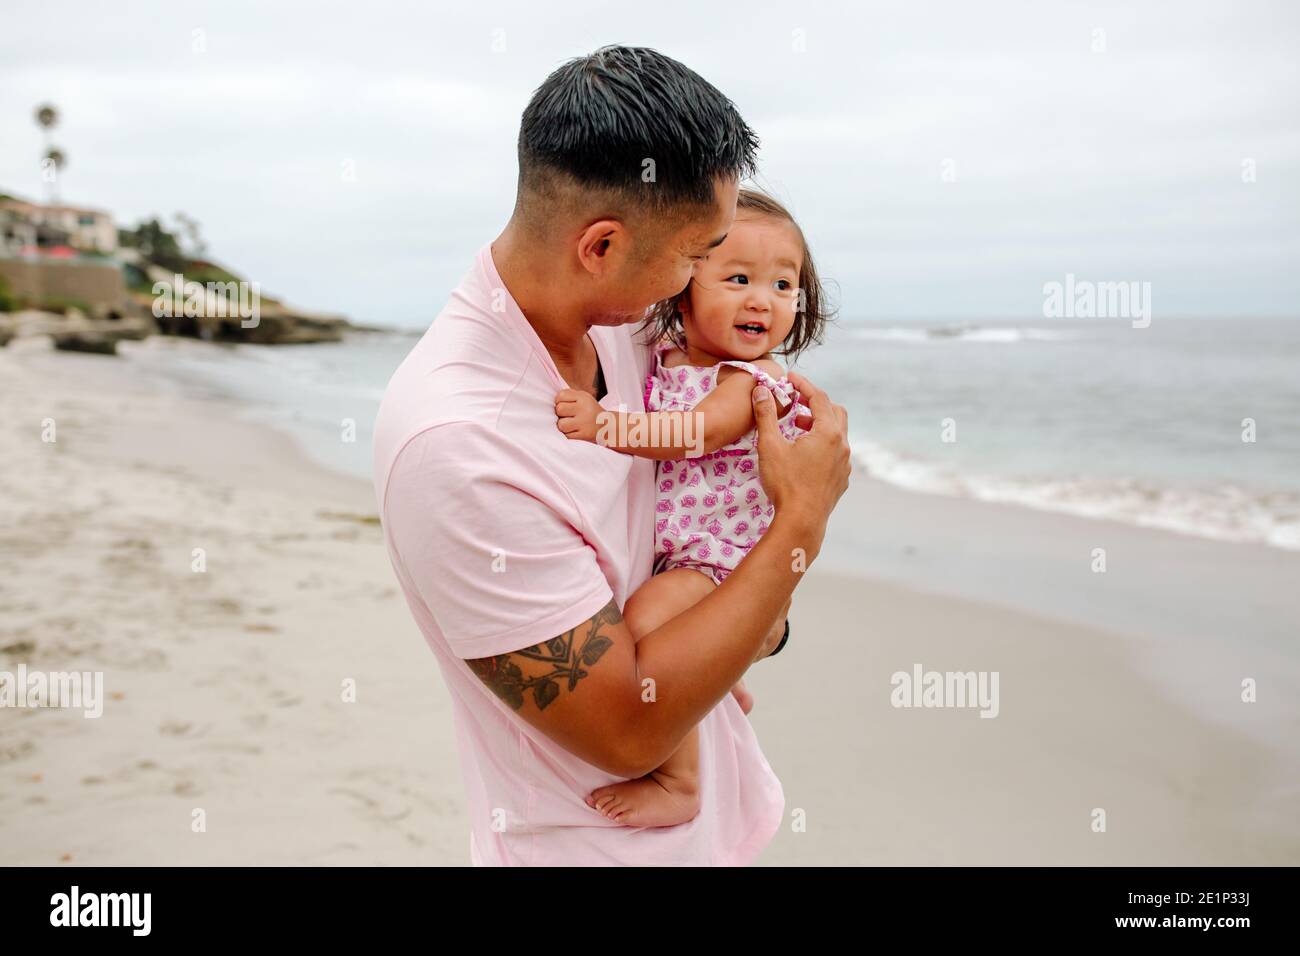 Adoring Asian dad with crewcut holds sweet smiling daughter at beach Stock Photo